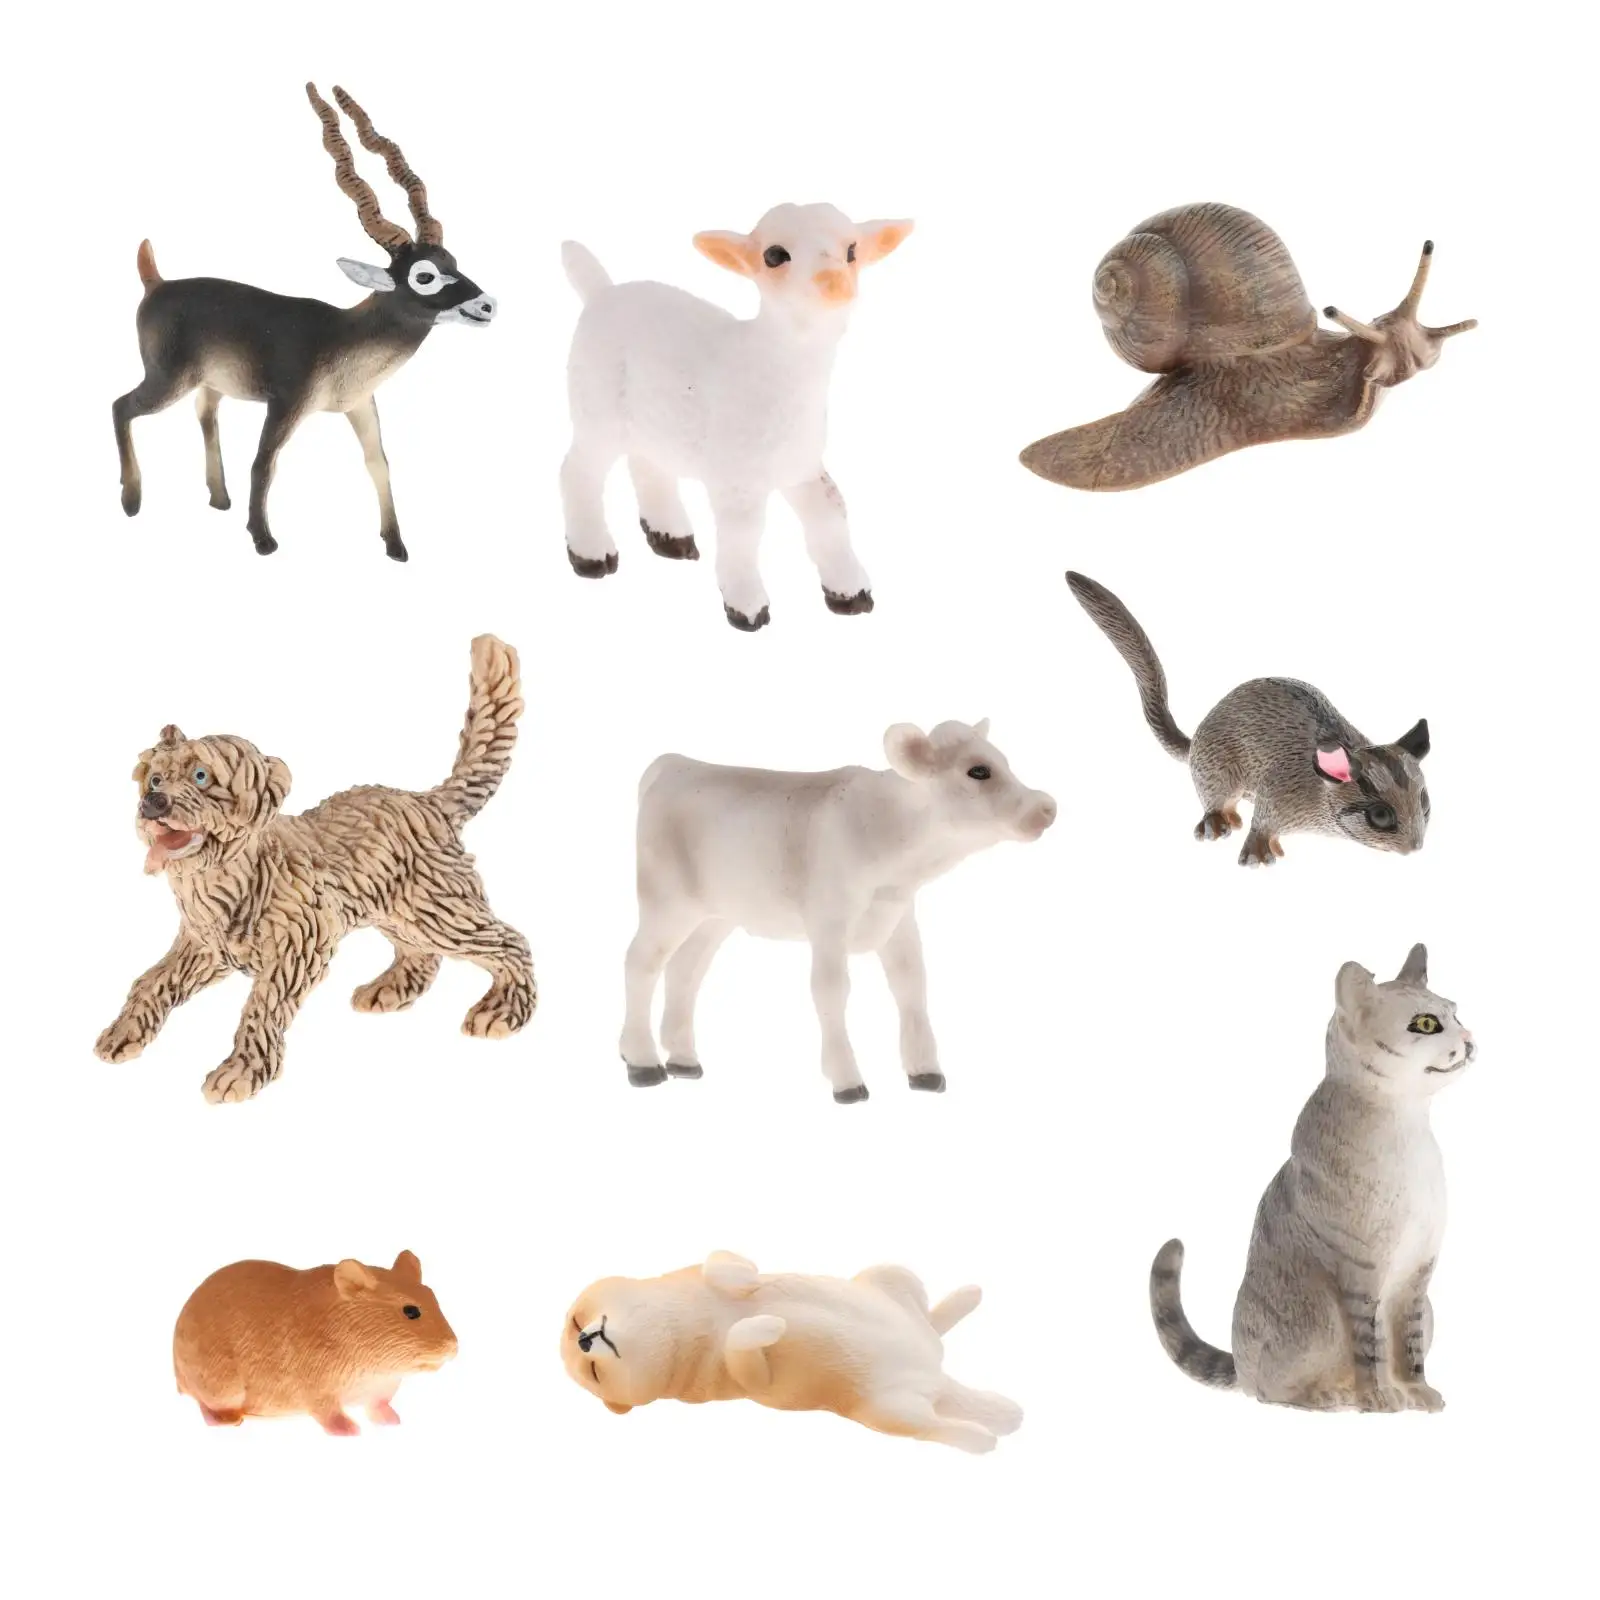 Simulated Action Figures Mini Animals Figurine Simulated Realistic Animals Home Decoration Gift